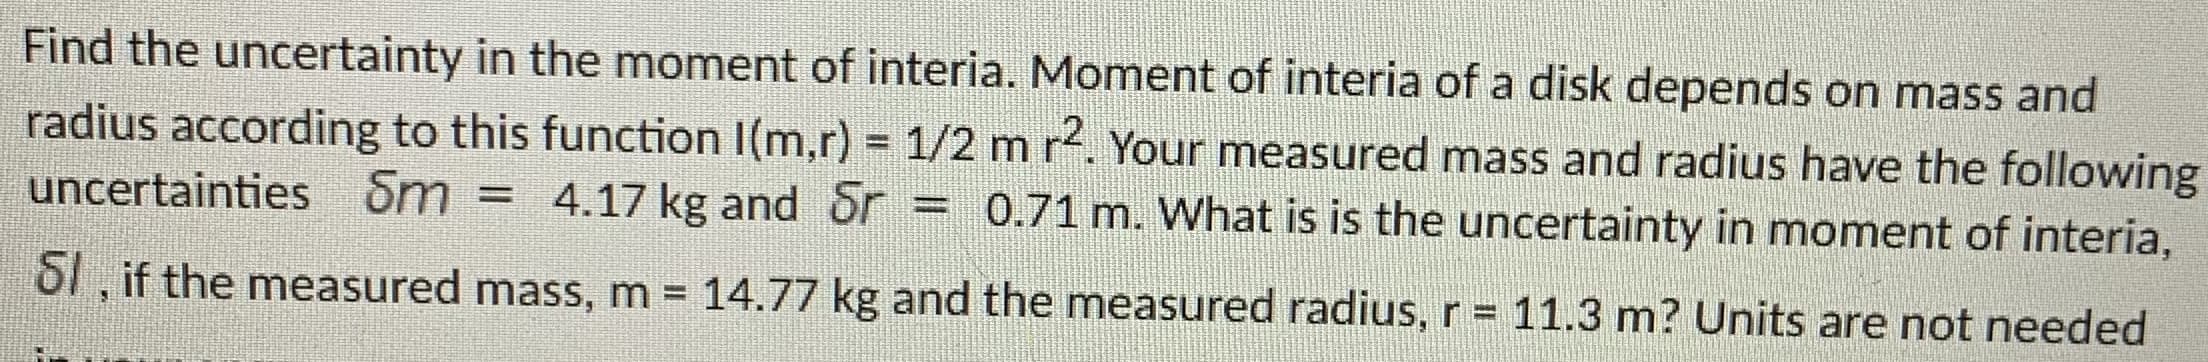 Find the uncertainty in the moment of interia. Moment of interia of a disk depends on mass and
radius according to this function I(m,r) = 1/2 m r. Your measured mass and radius have the following
uncertainties Sm = 4.17 kg and Sr
= 0.71 m. What is is the uncertainty in moment of interia,
%3D
S1, if the measured mass, m = 14.77 kg and the measured radius, r= 11.3 m? Units are not needed
%3D
